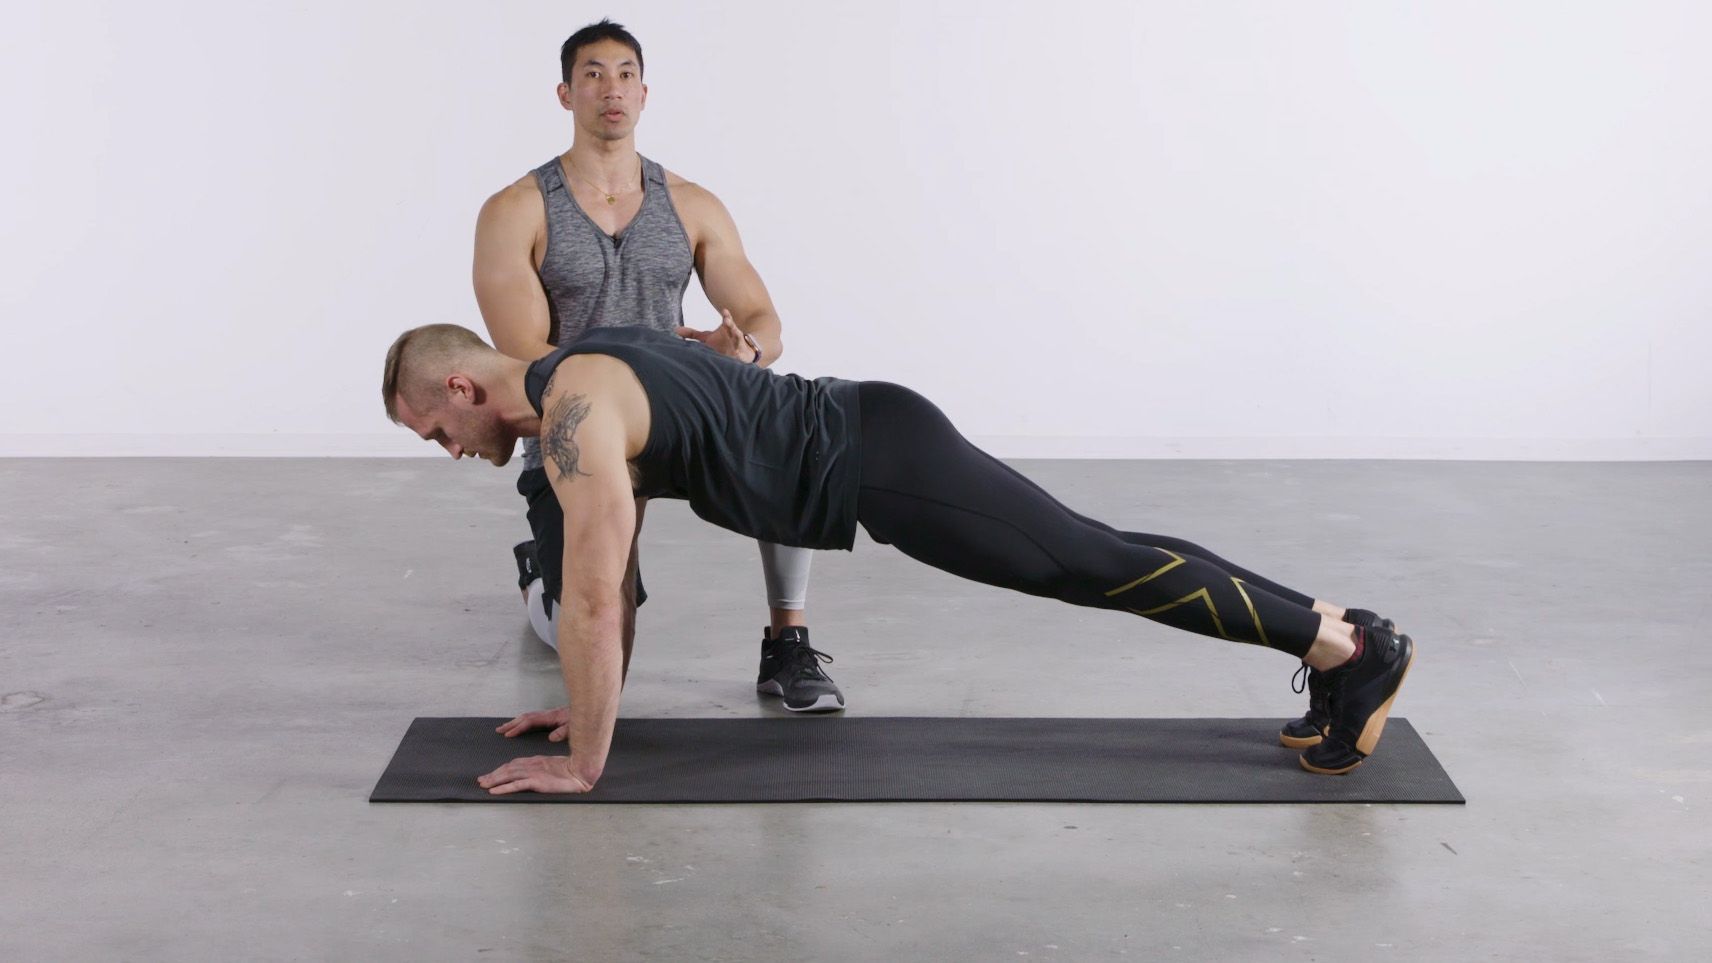 perfect pushup form